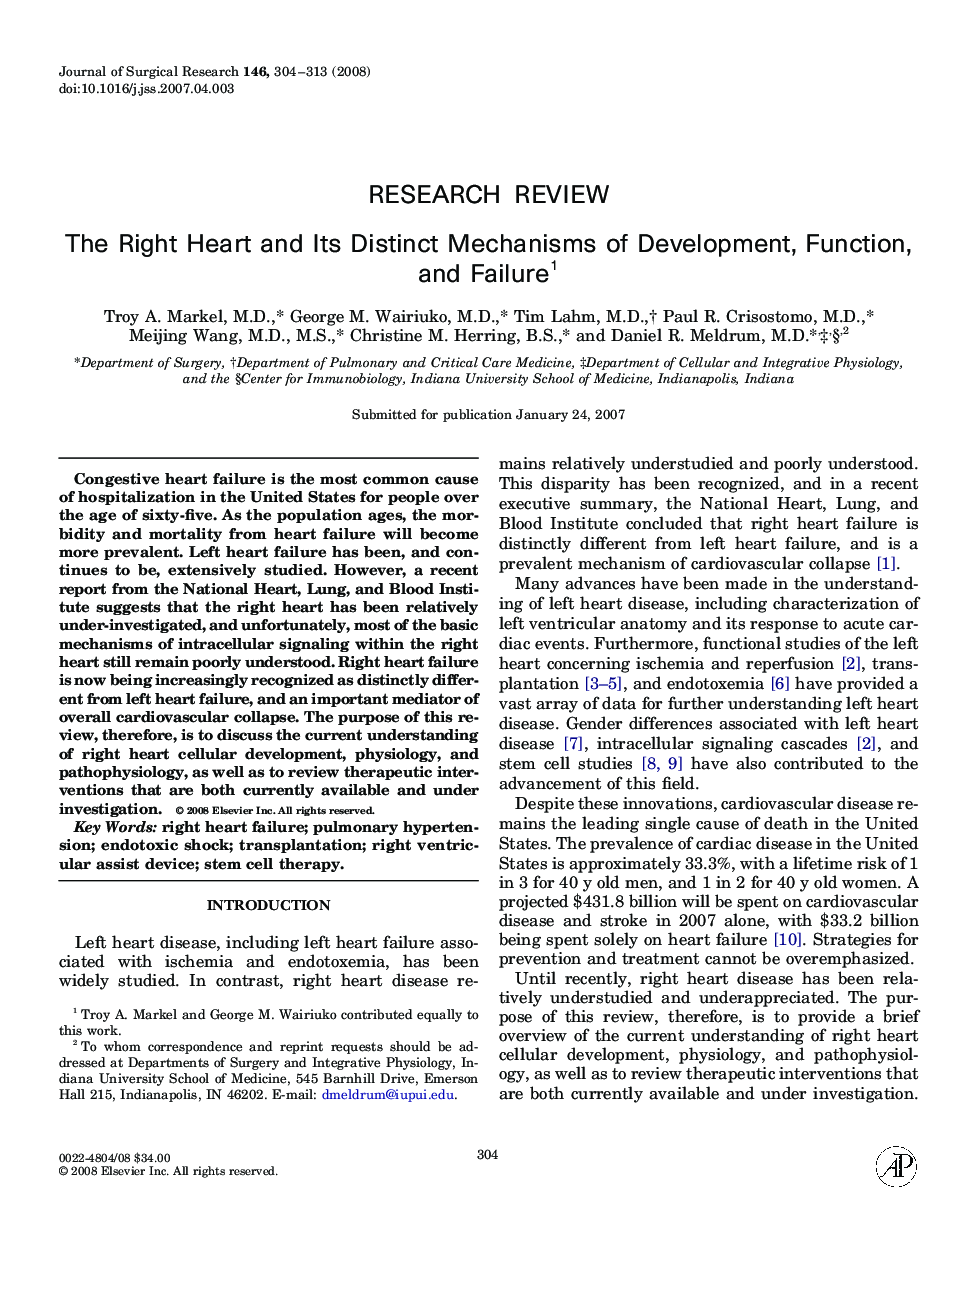 The Right Heart and Its Distinct Mechanisms of Development, Function, and Failure 1